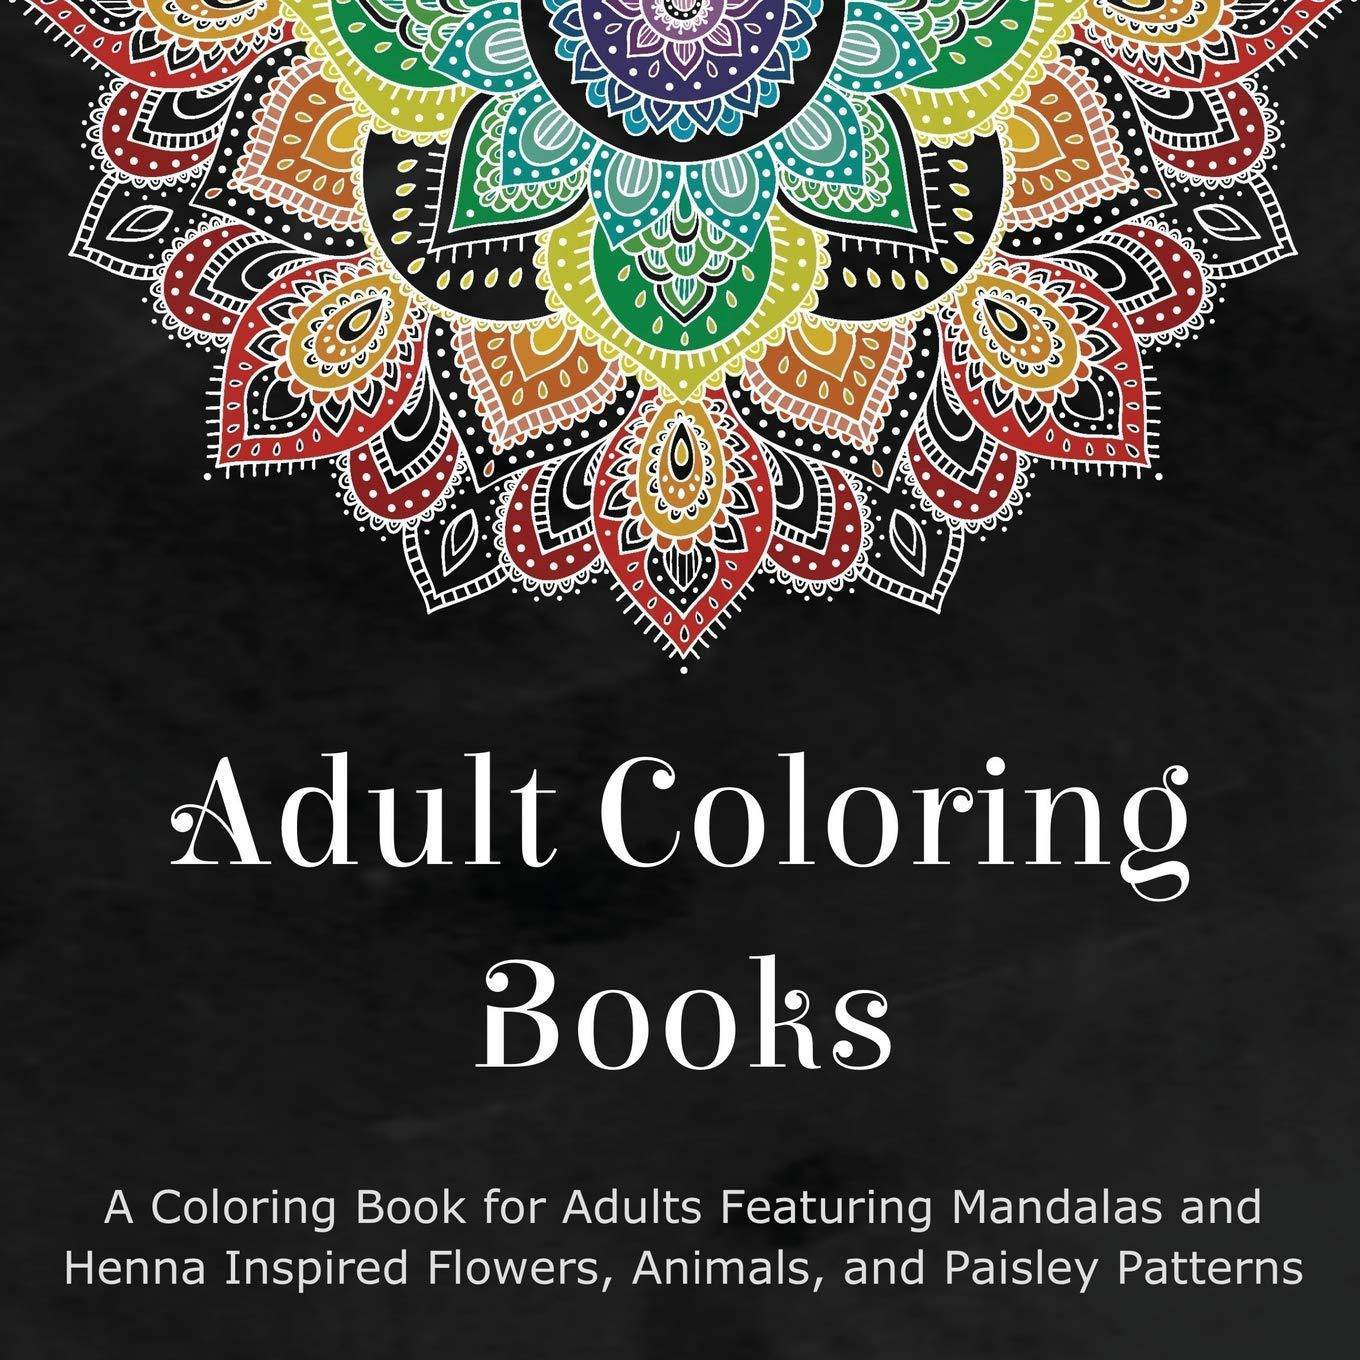 Adult Coloring Books: A Coloring Book for Adults Featuring Manda - SureShot Books Publishing LLC